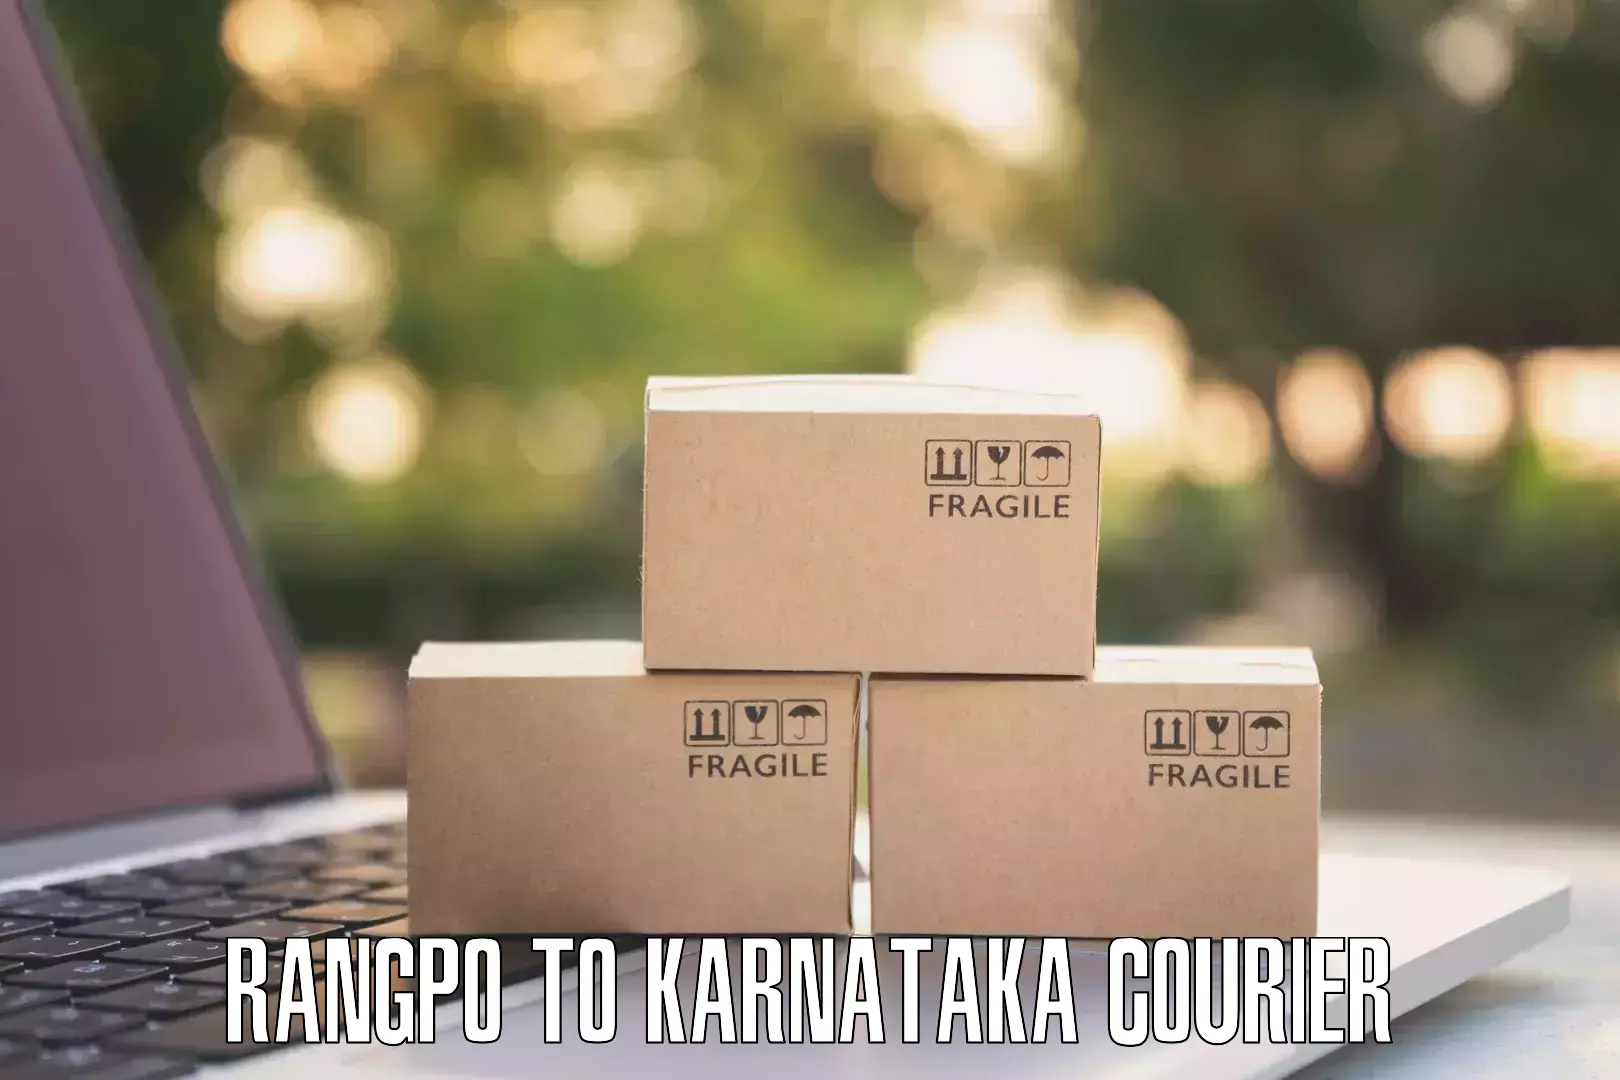 Online courier booking Rangpo to Mandya